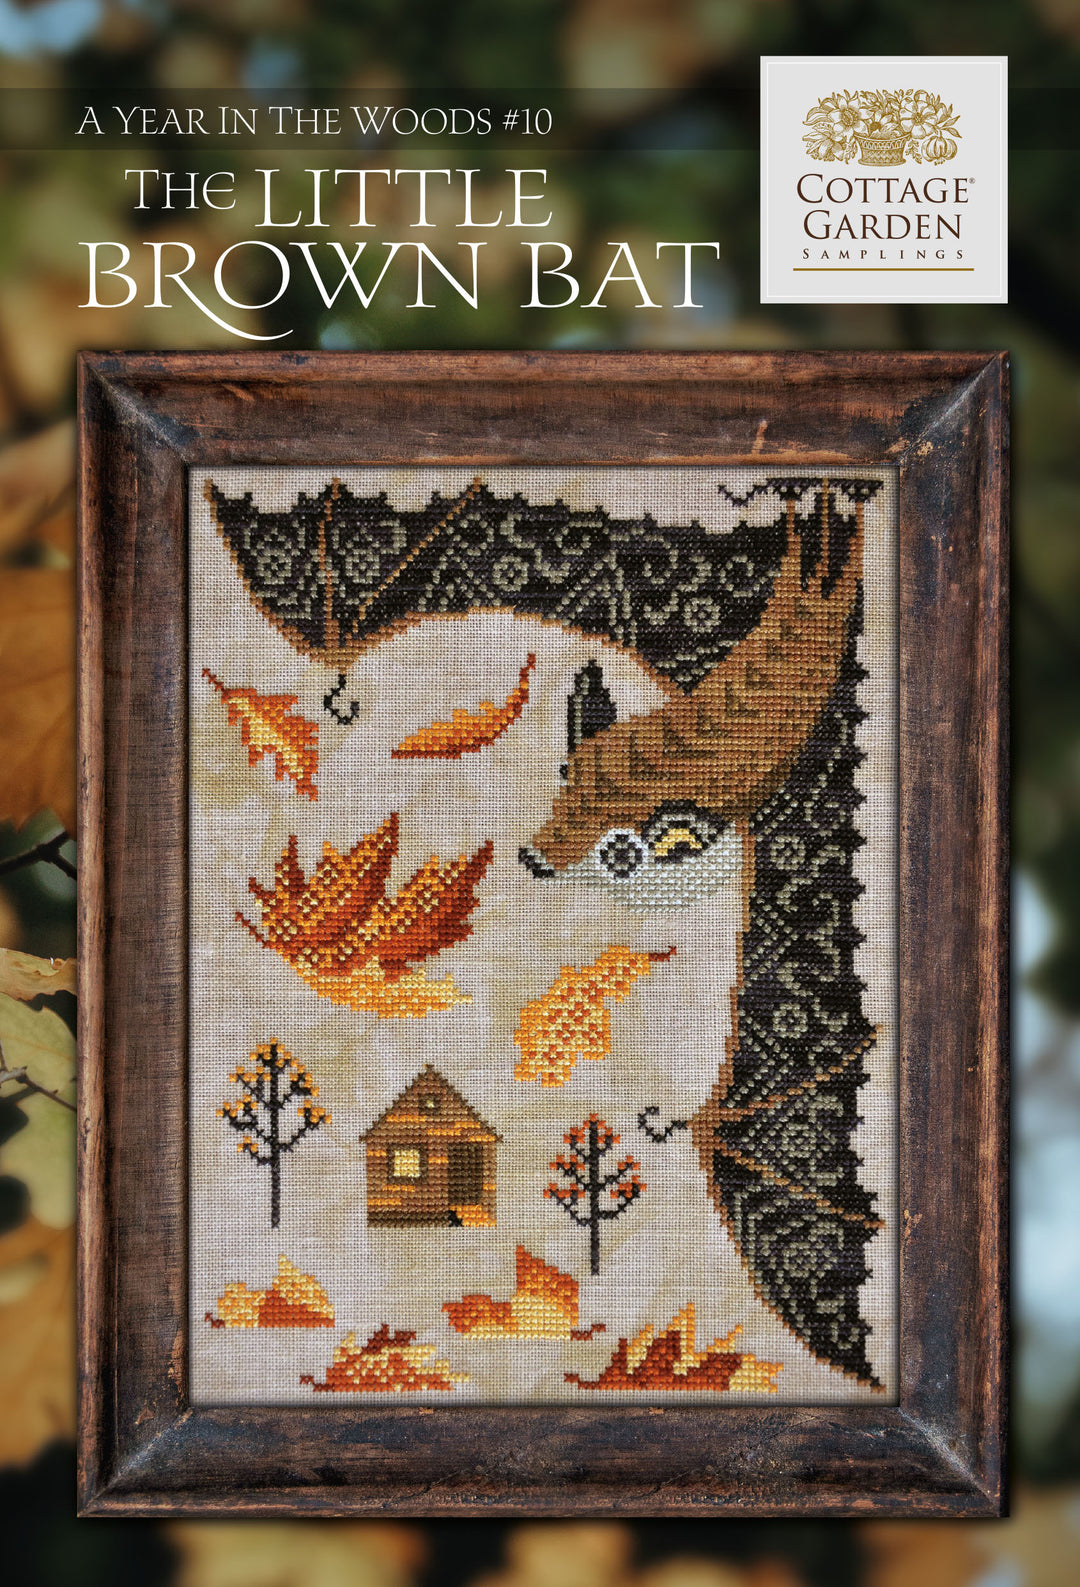 The Little Brown Bat, A Year in the Woods #10 | Cottage Garden Samplings